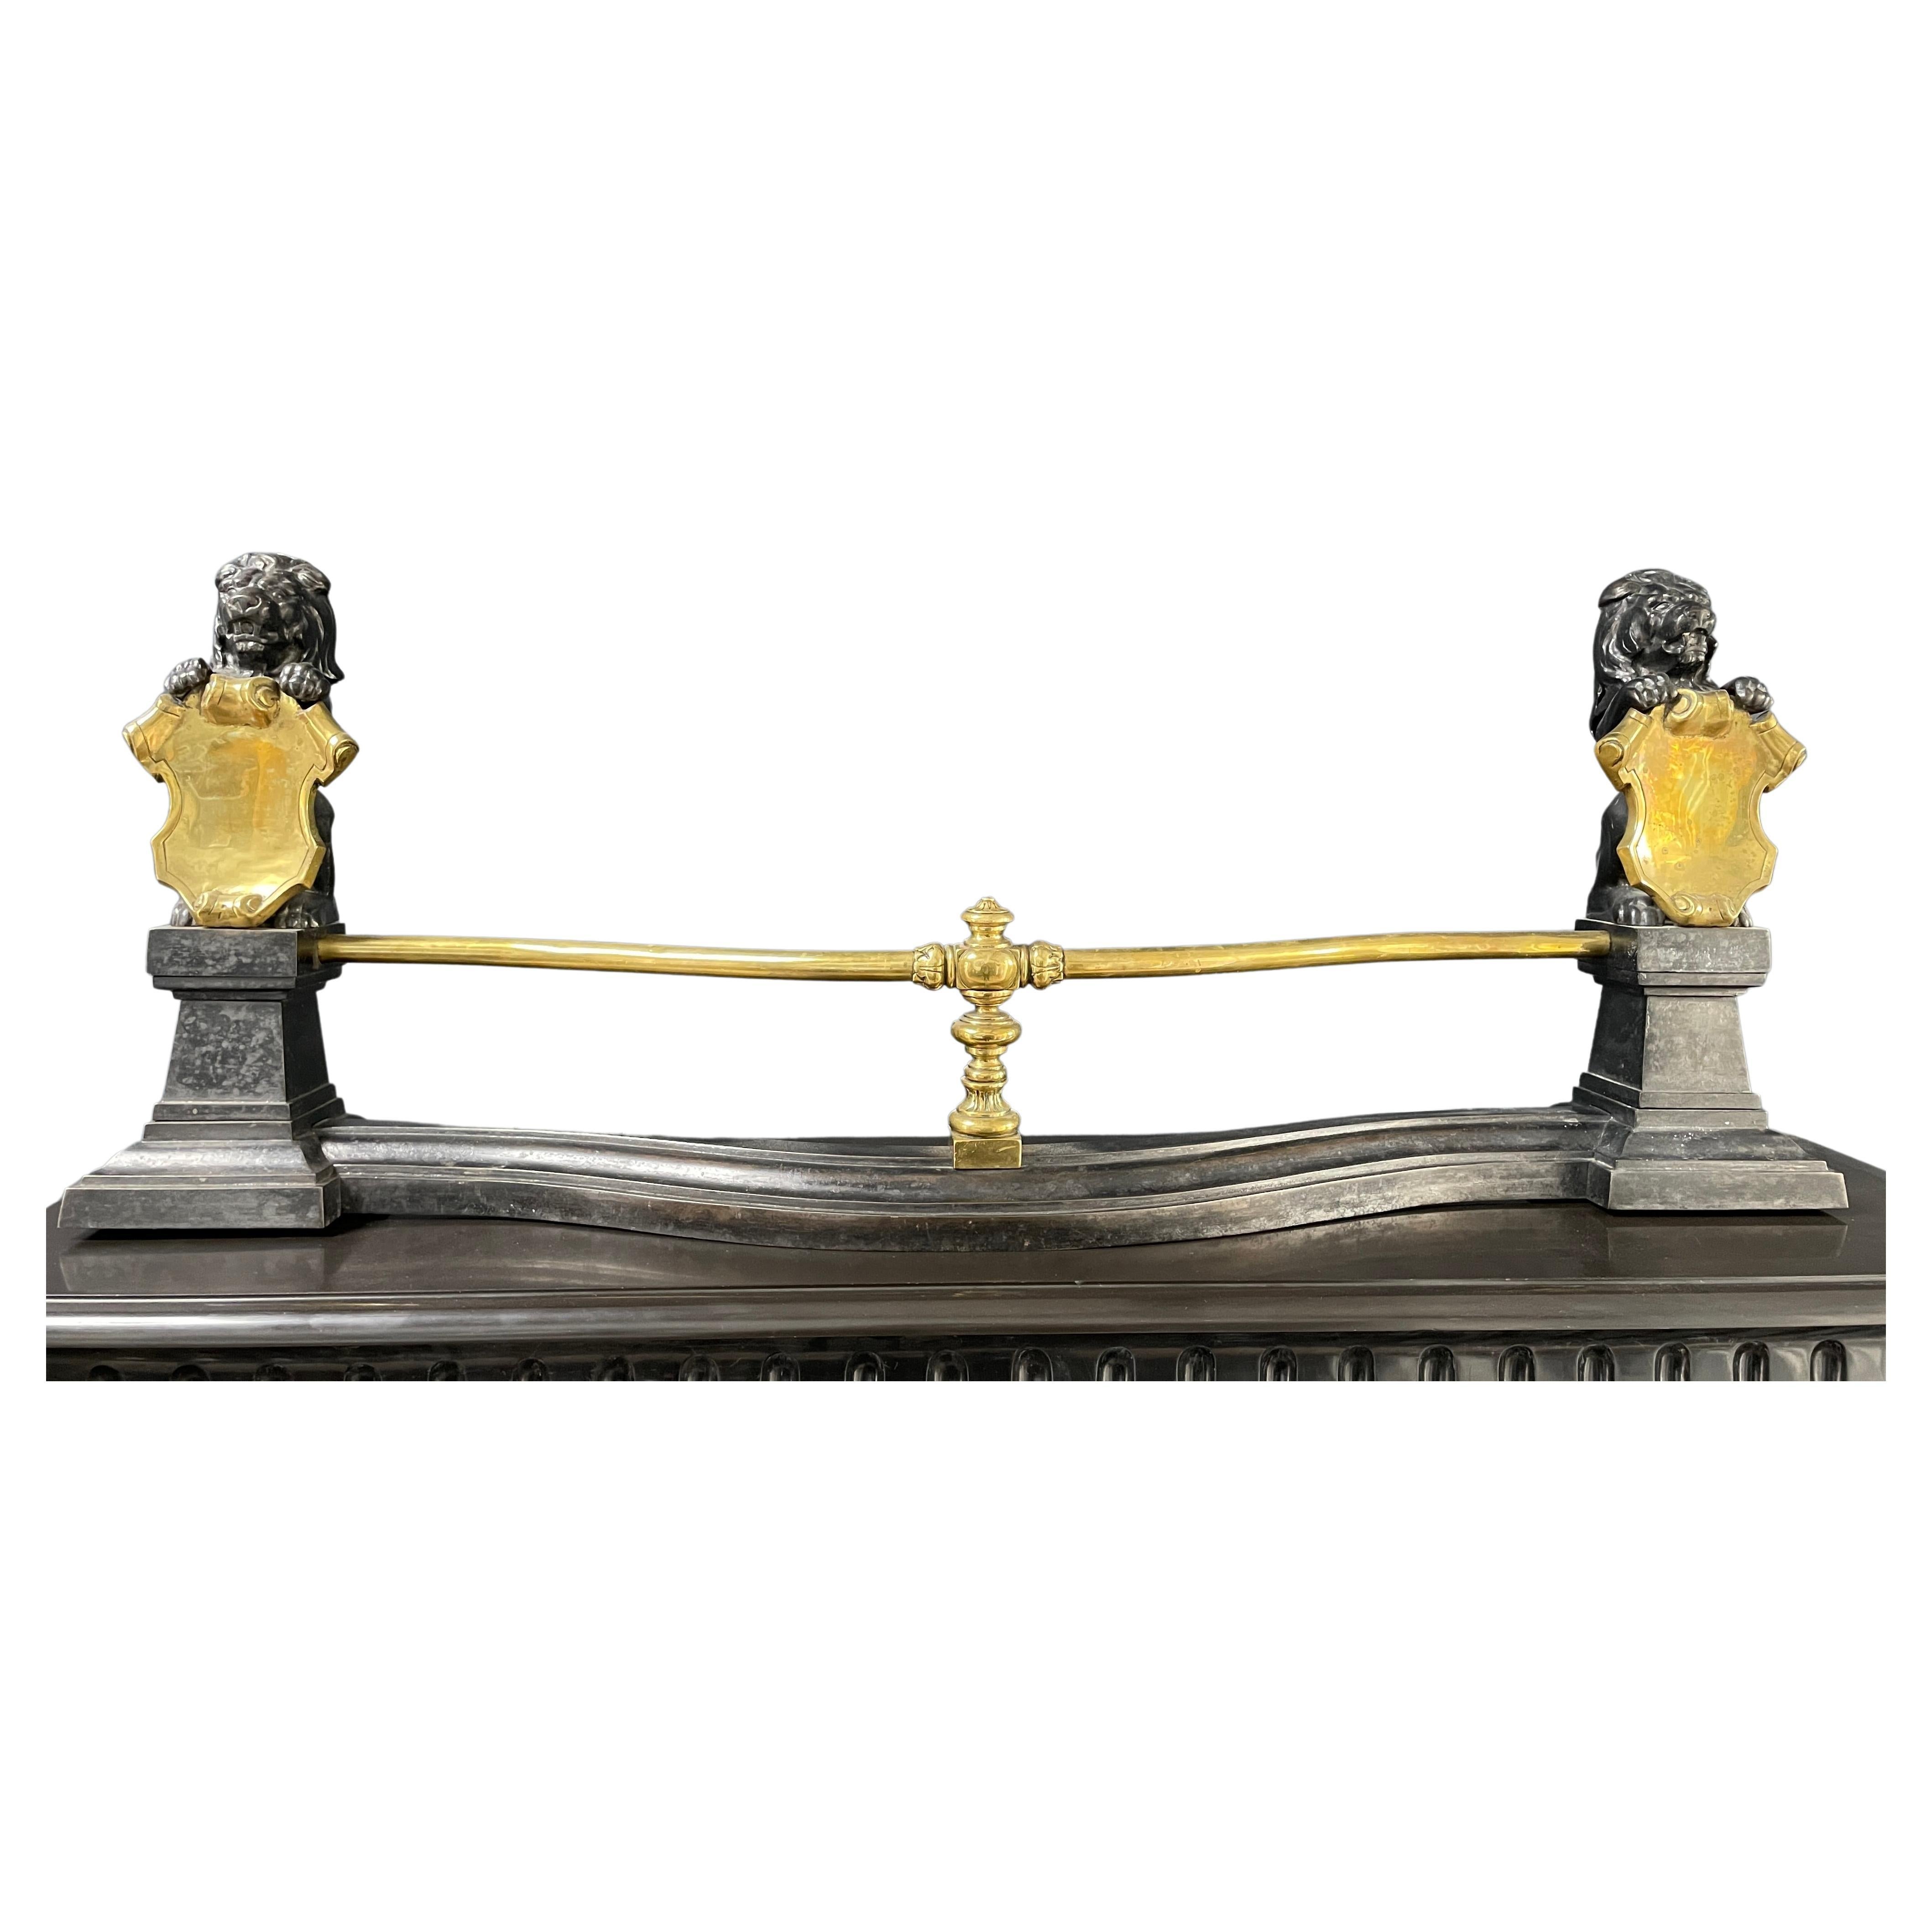 Luxury French Antique Fireplace Fender For Sale